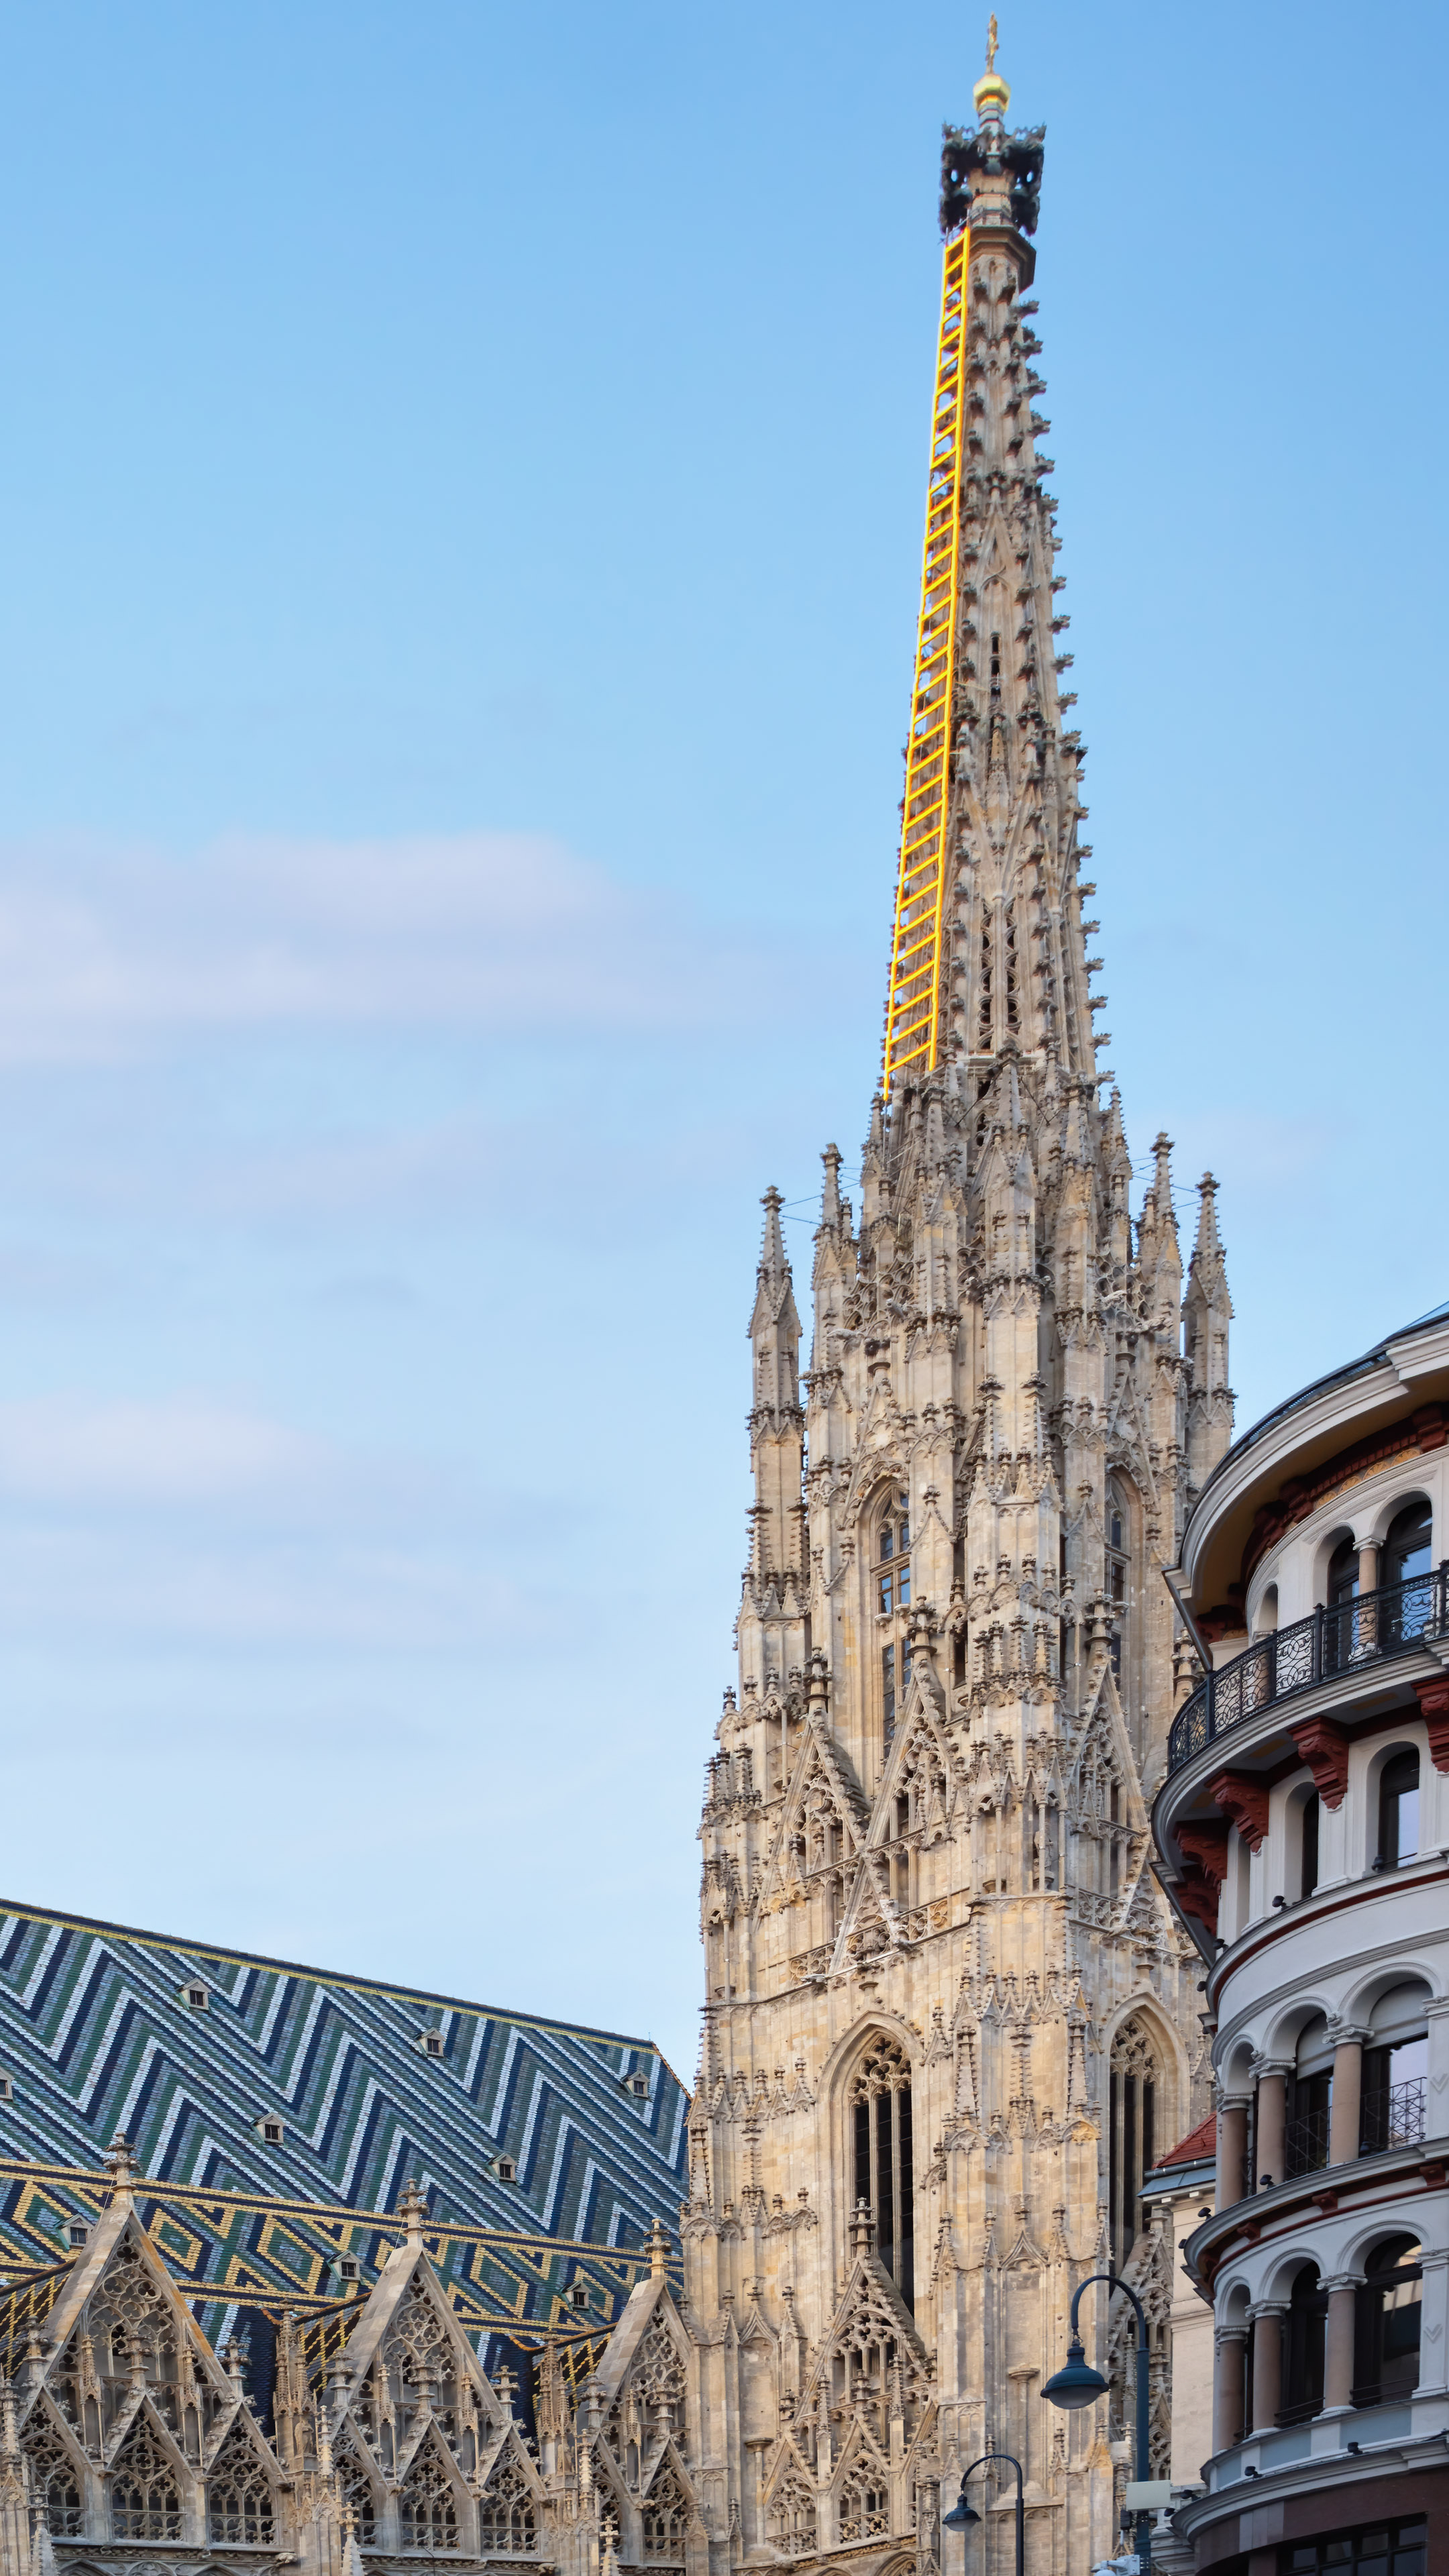 Bring the beauty of Vienna to your phone with this high-quality wallpaper.